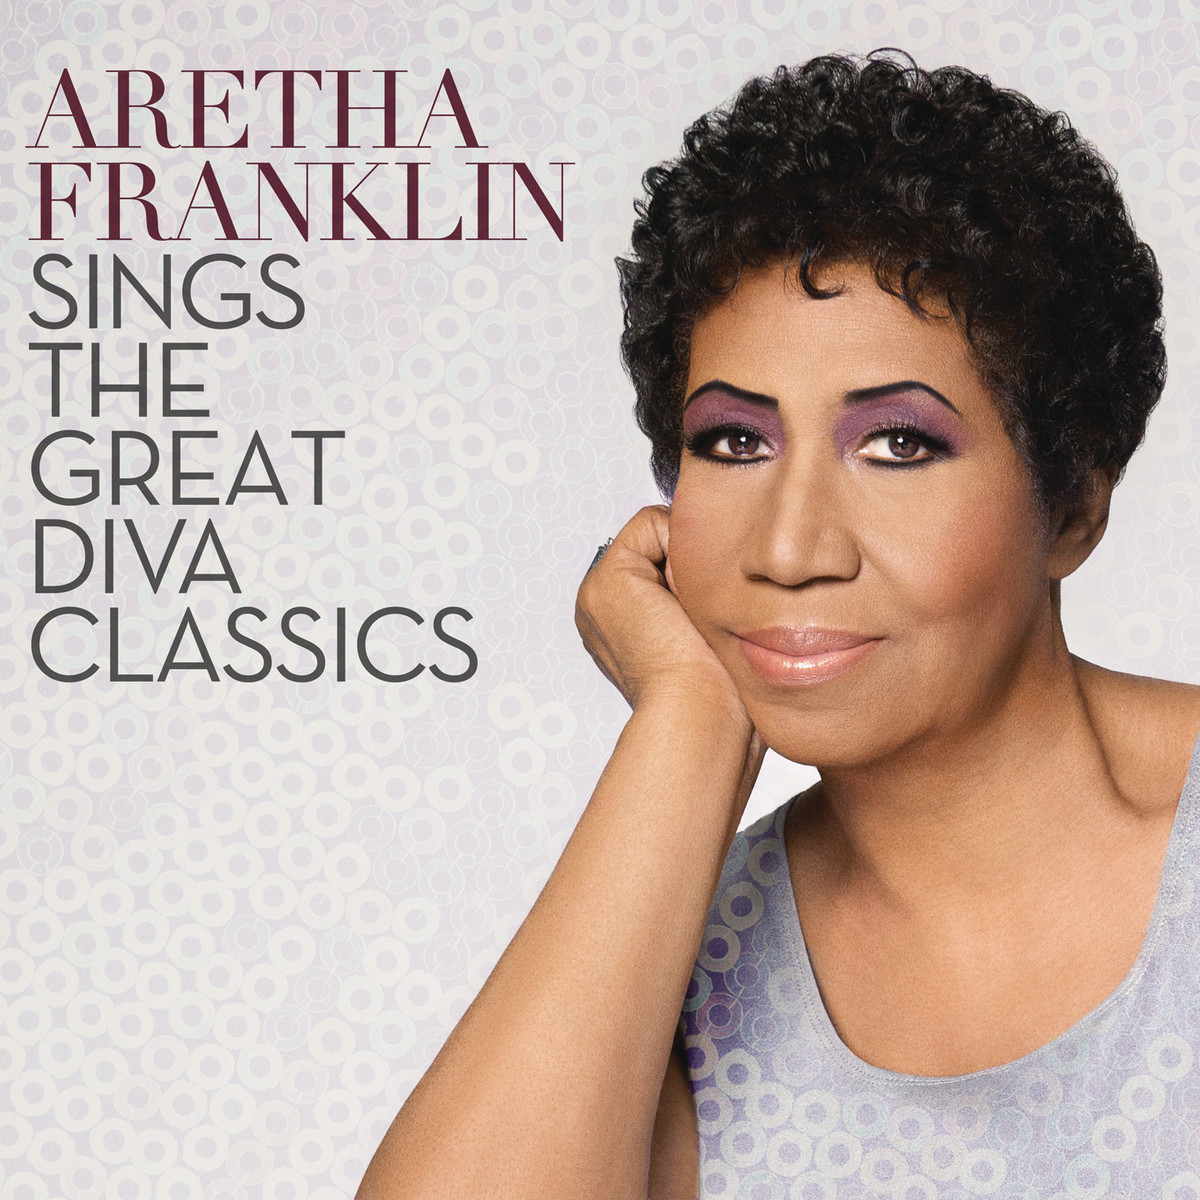 New Music: Aretha Franklin "Rolling in the Deep" (Adele Cover - Aretha Version)